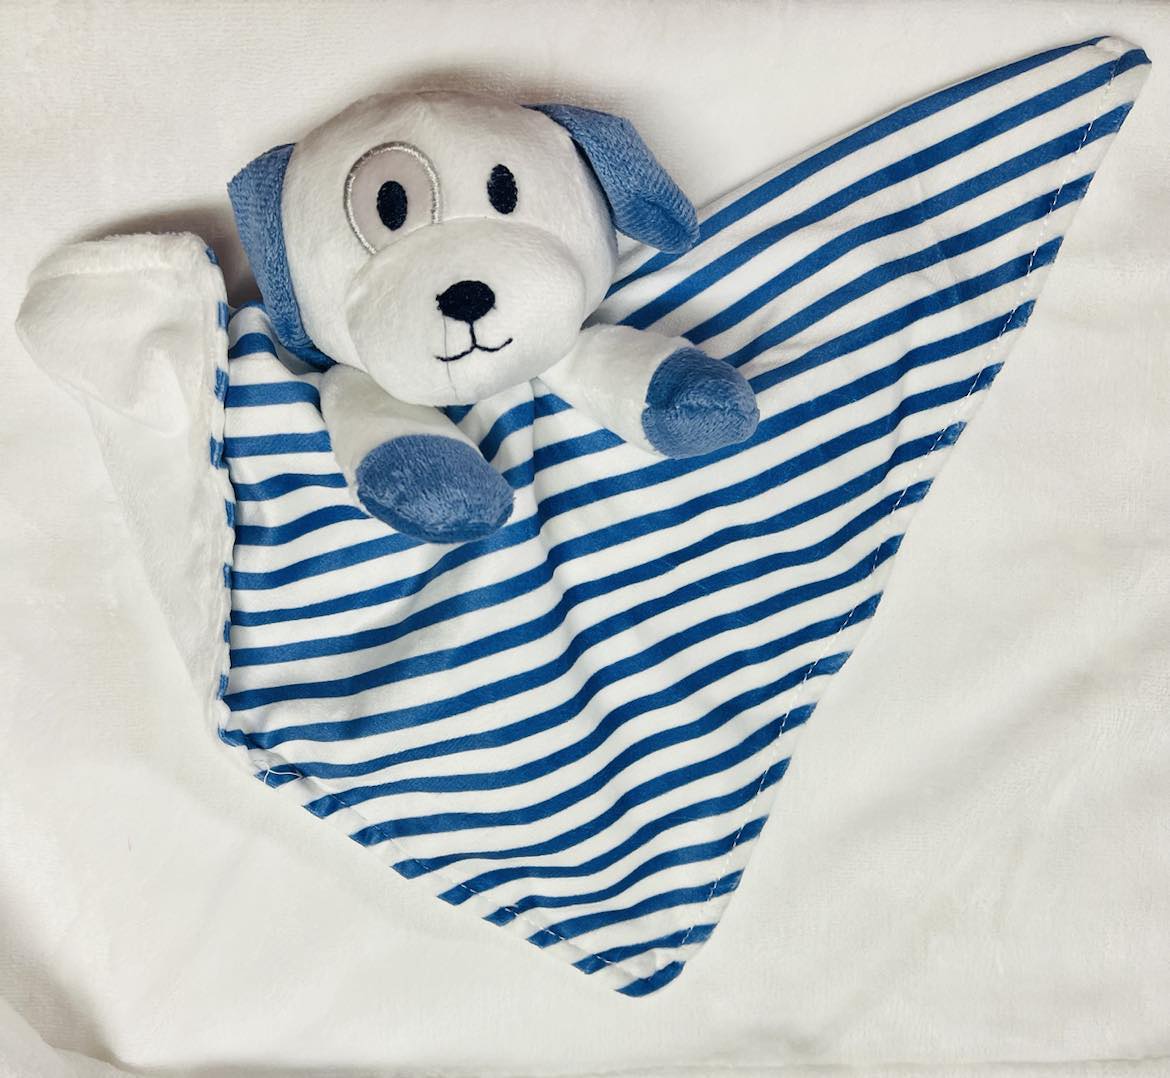 100% Polyester Stuffed/ Plush Dog Security Blanket for Sublimation or Htv